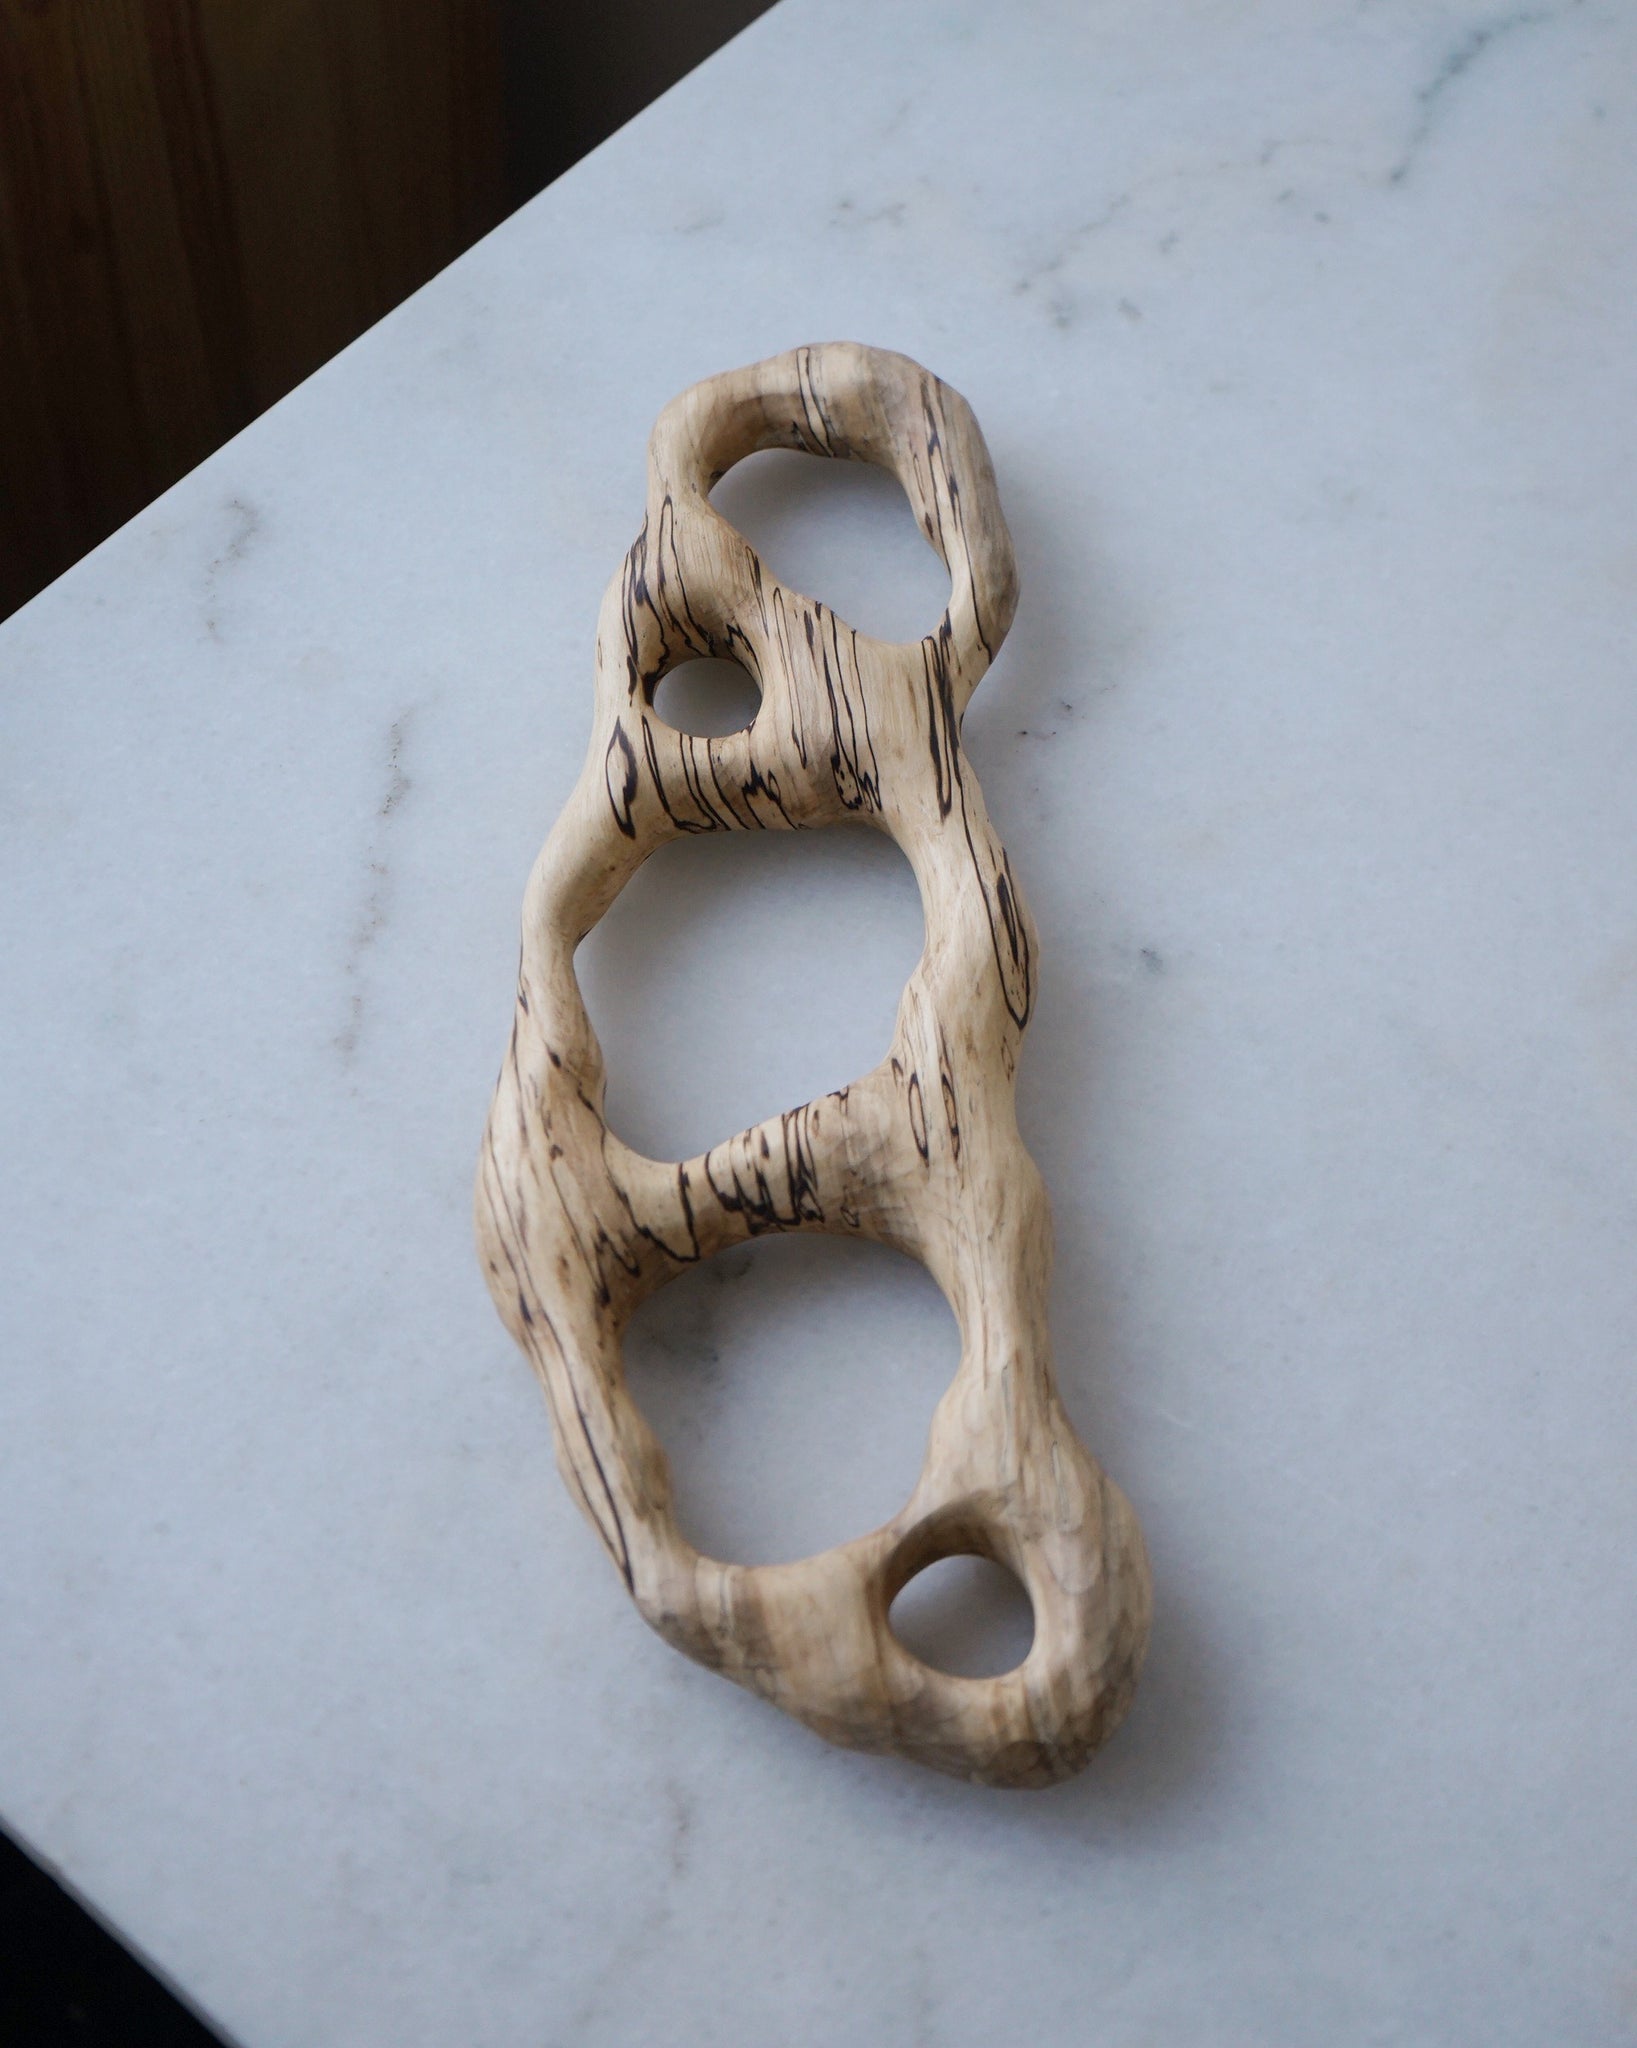 GRAIN & KNOT - Looped cut out sculpture